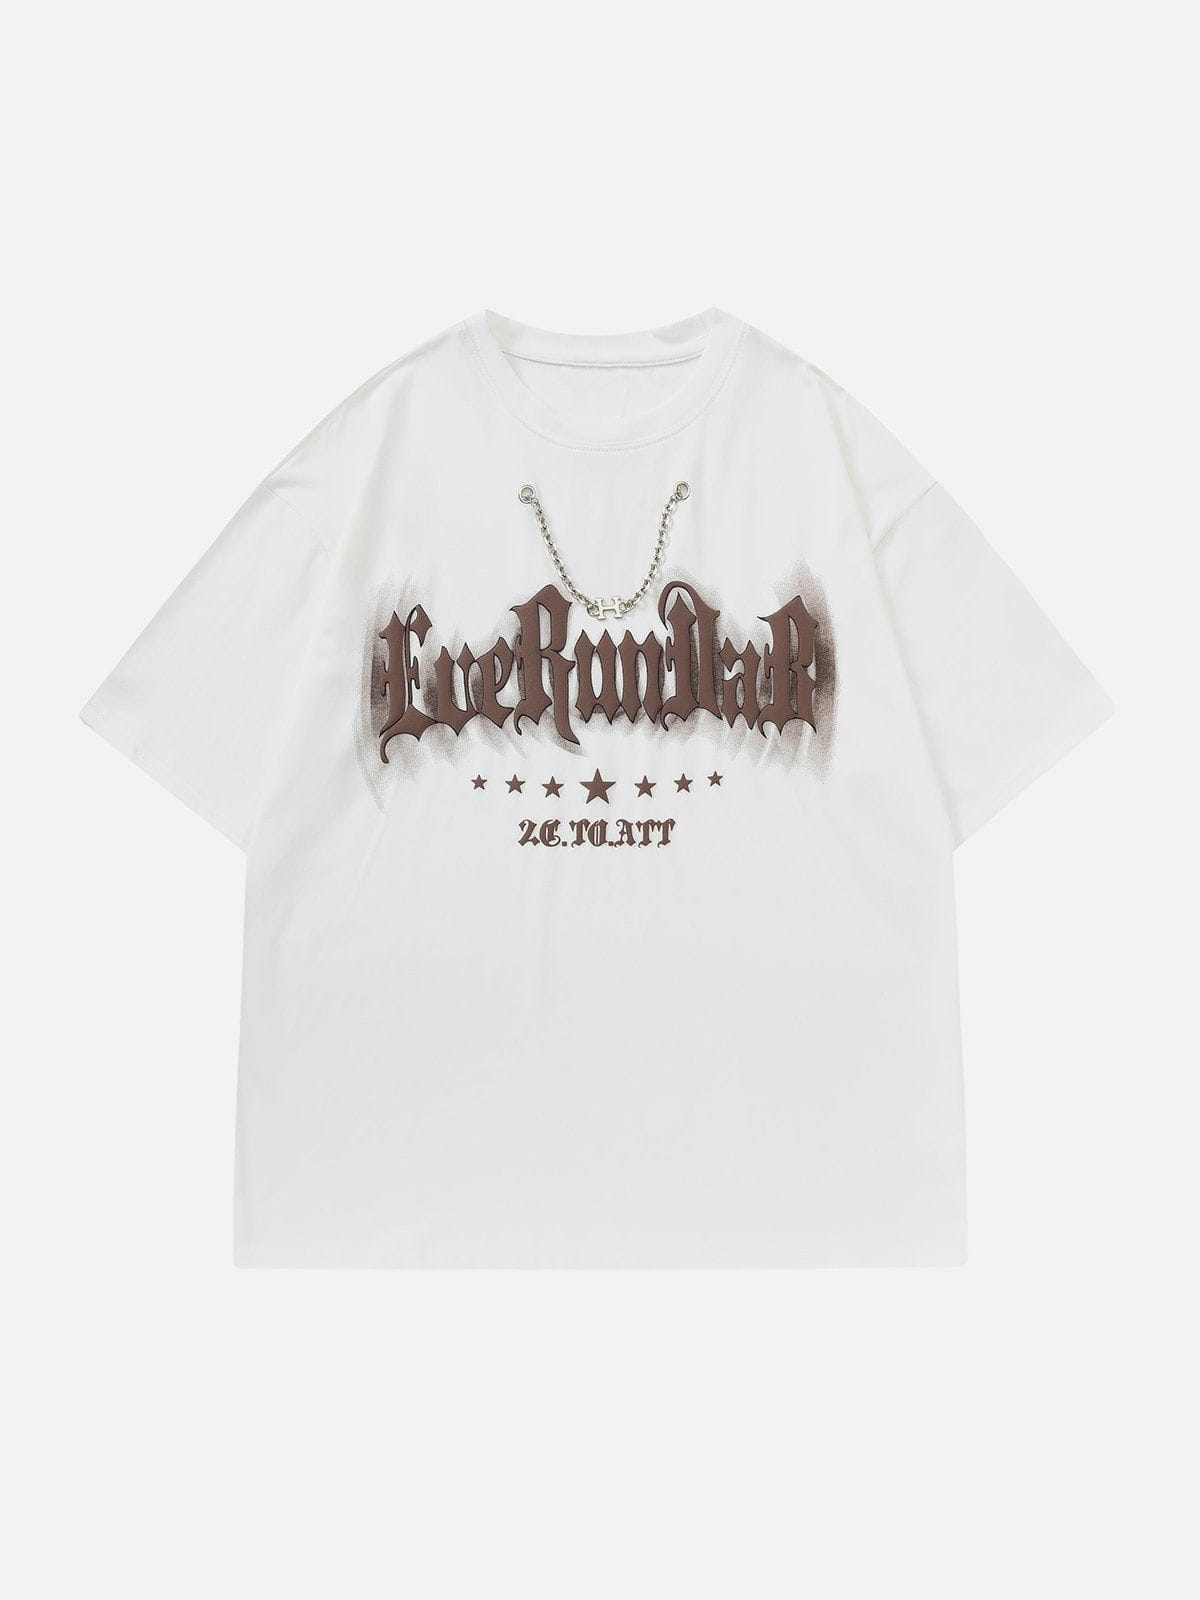 Sneakerland™ - Letter Printing Chain Decoration Tee